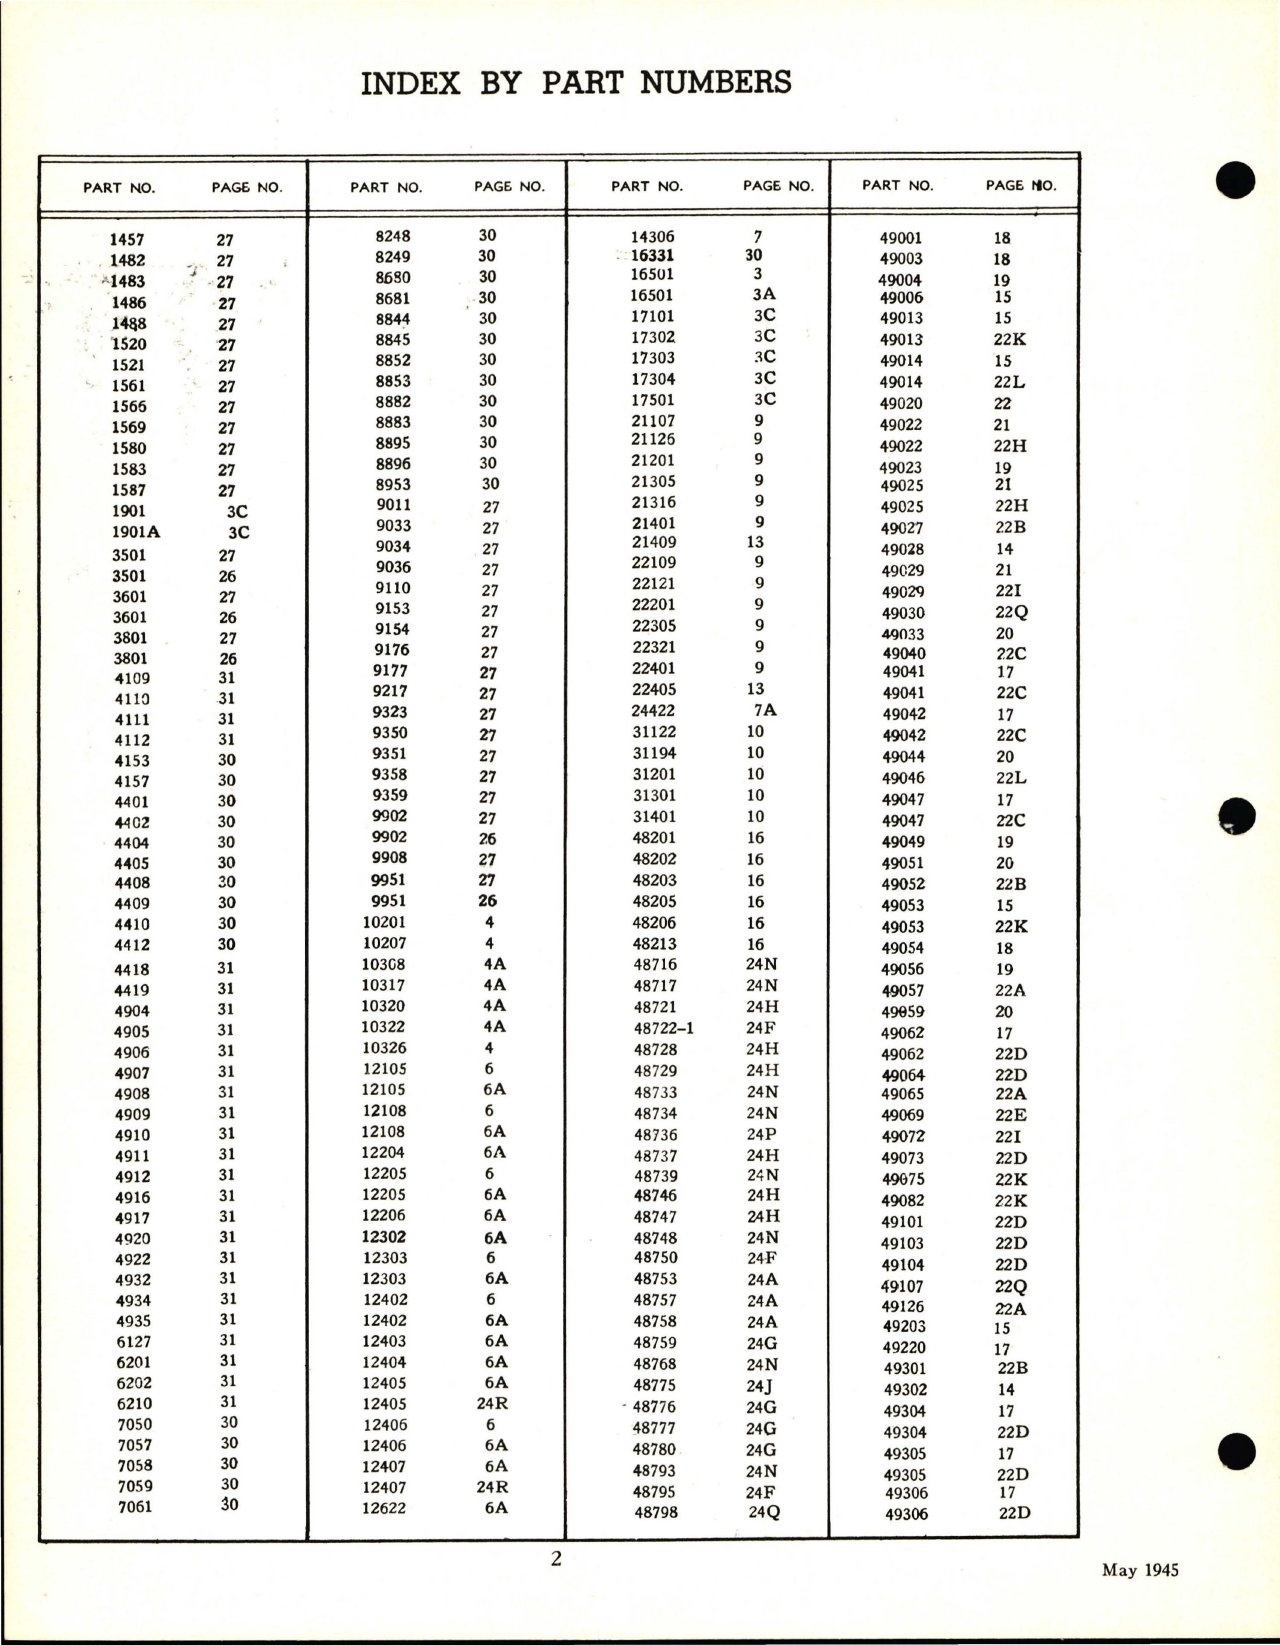 Sample page 5 from AirCorps Library document: DOT Fasteners - Engineering Data Catalog